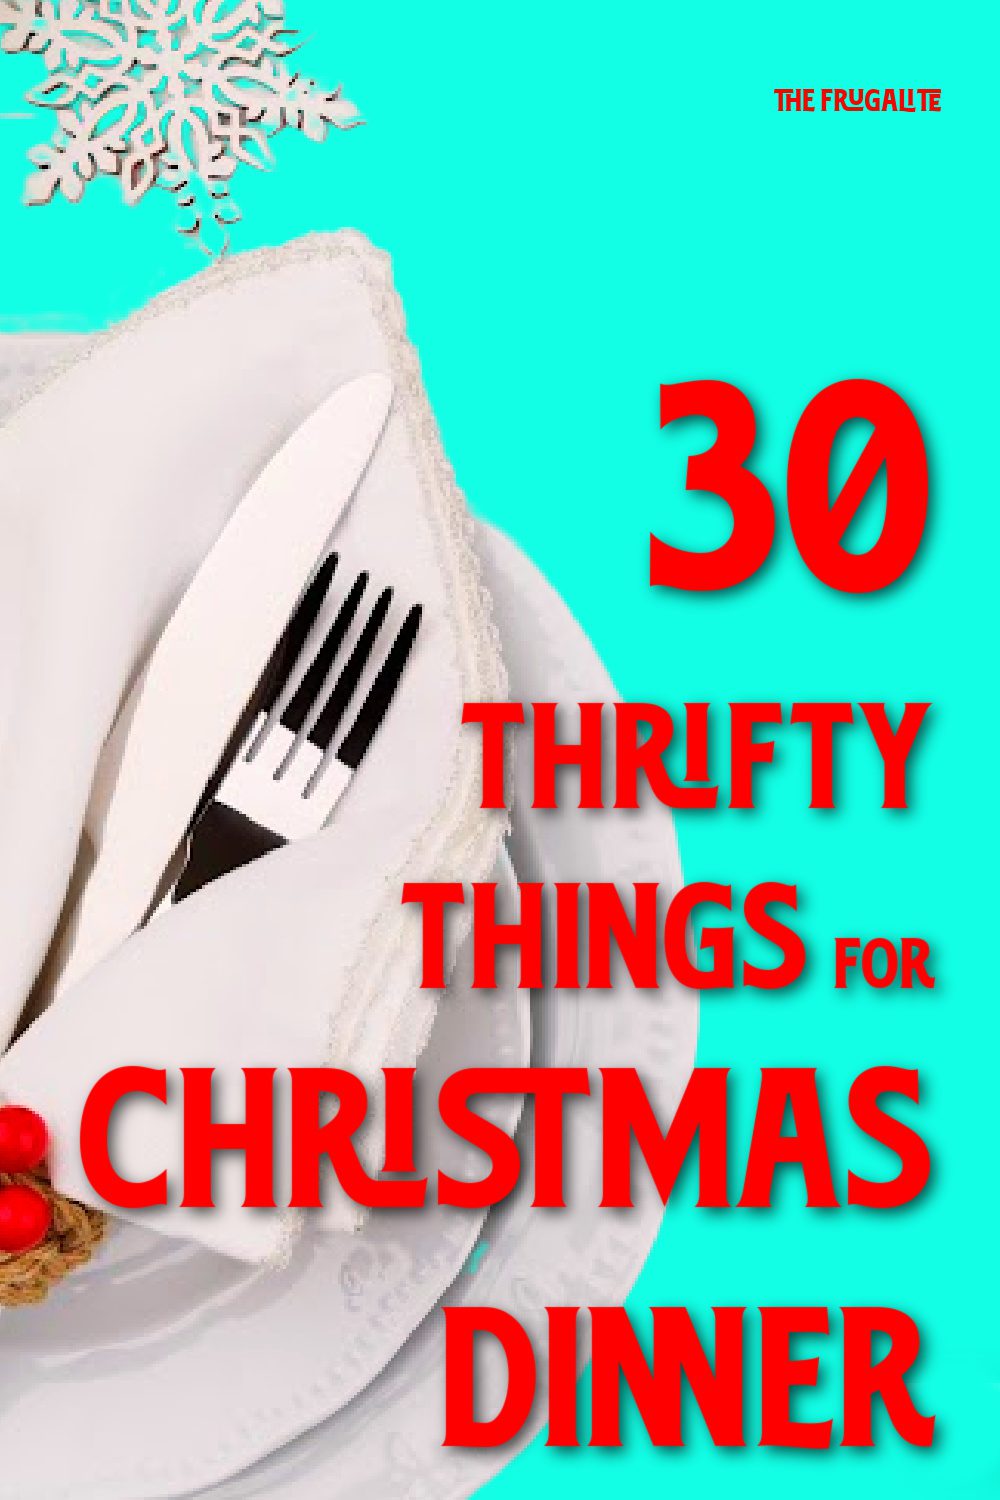 30 Thrifty Things for Christmas Dinner